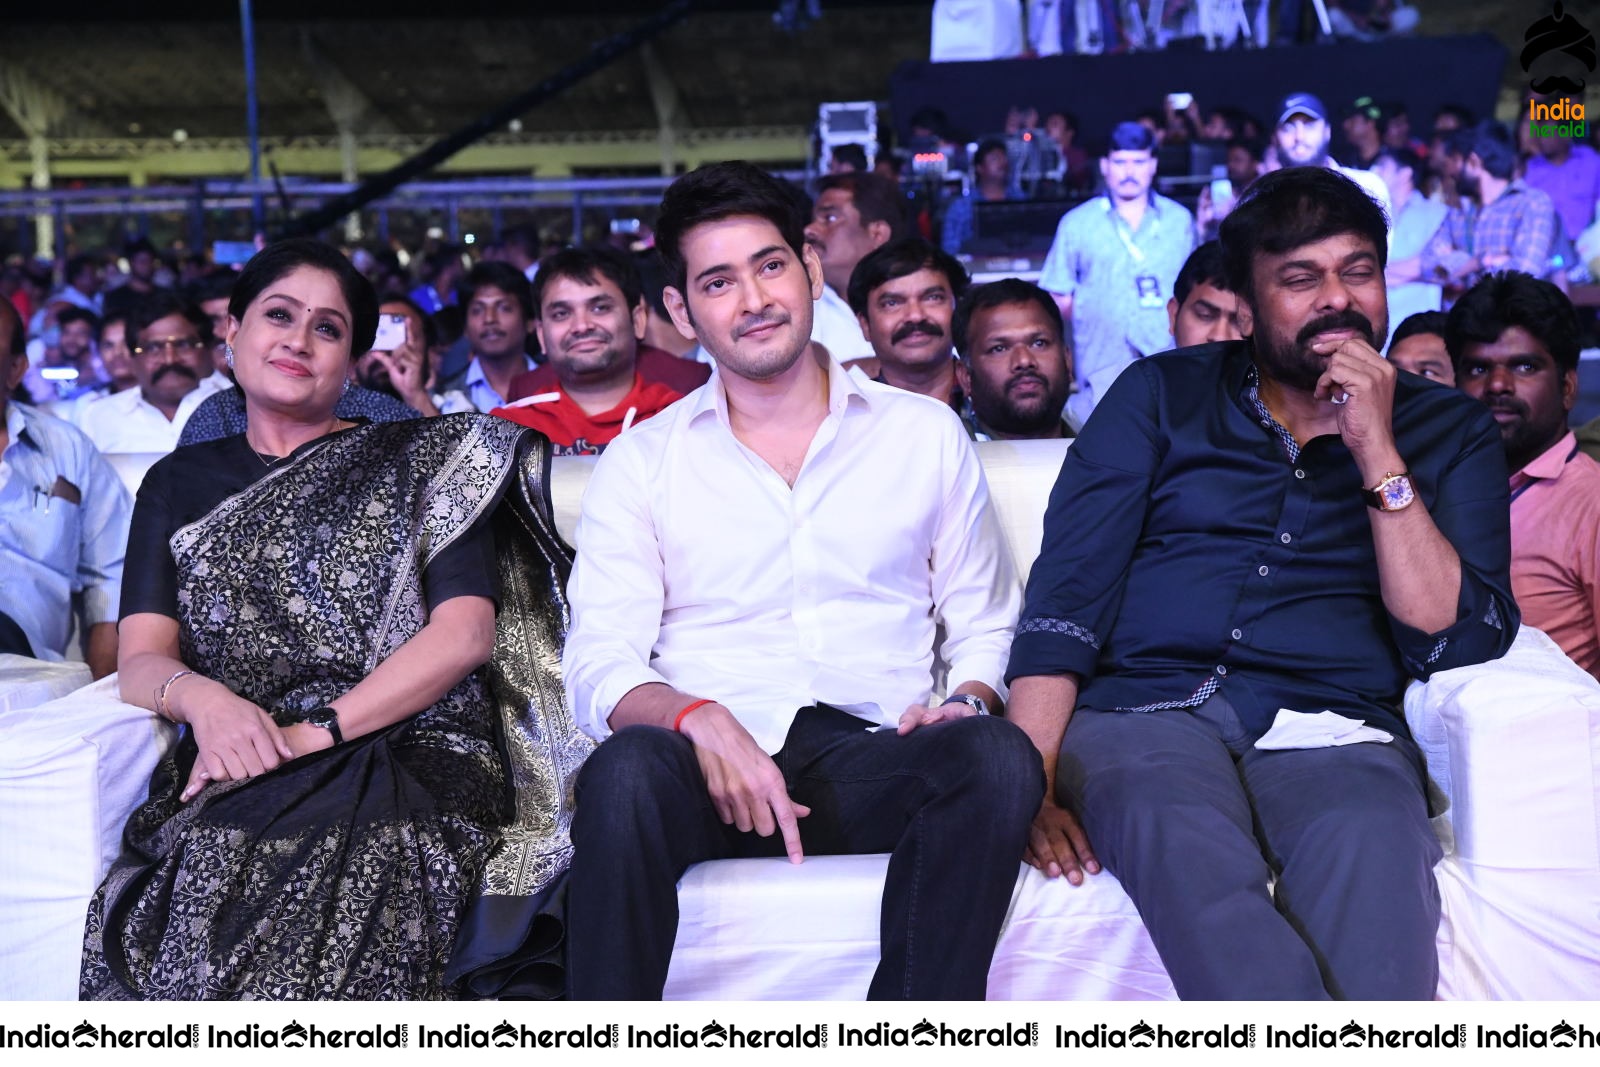 Some More Candid moments from Sarileru Neekevvaru event Set 2